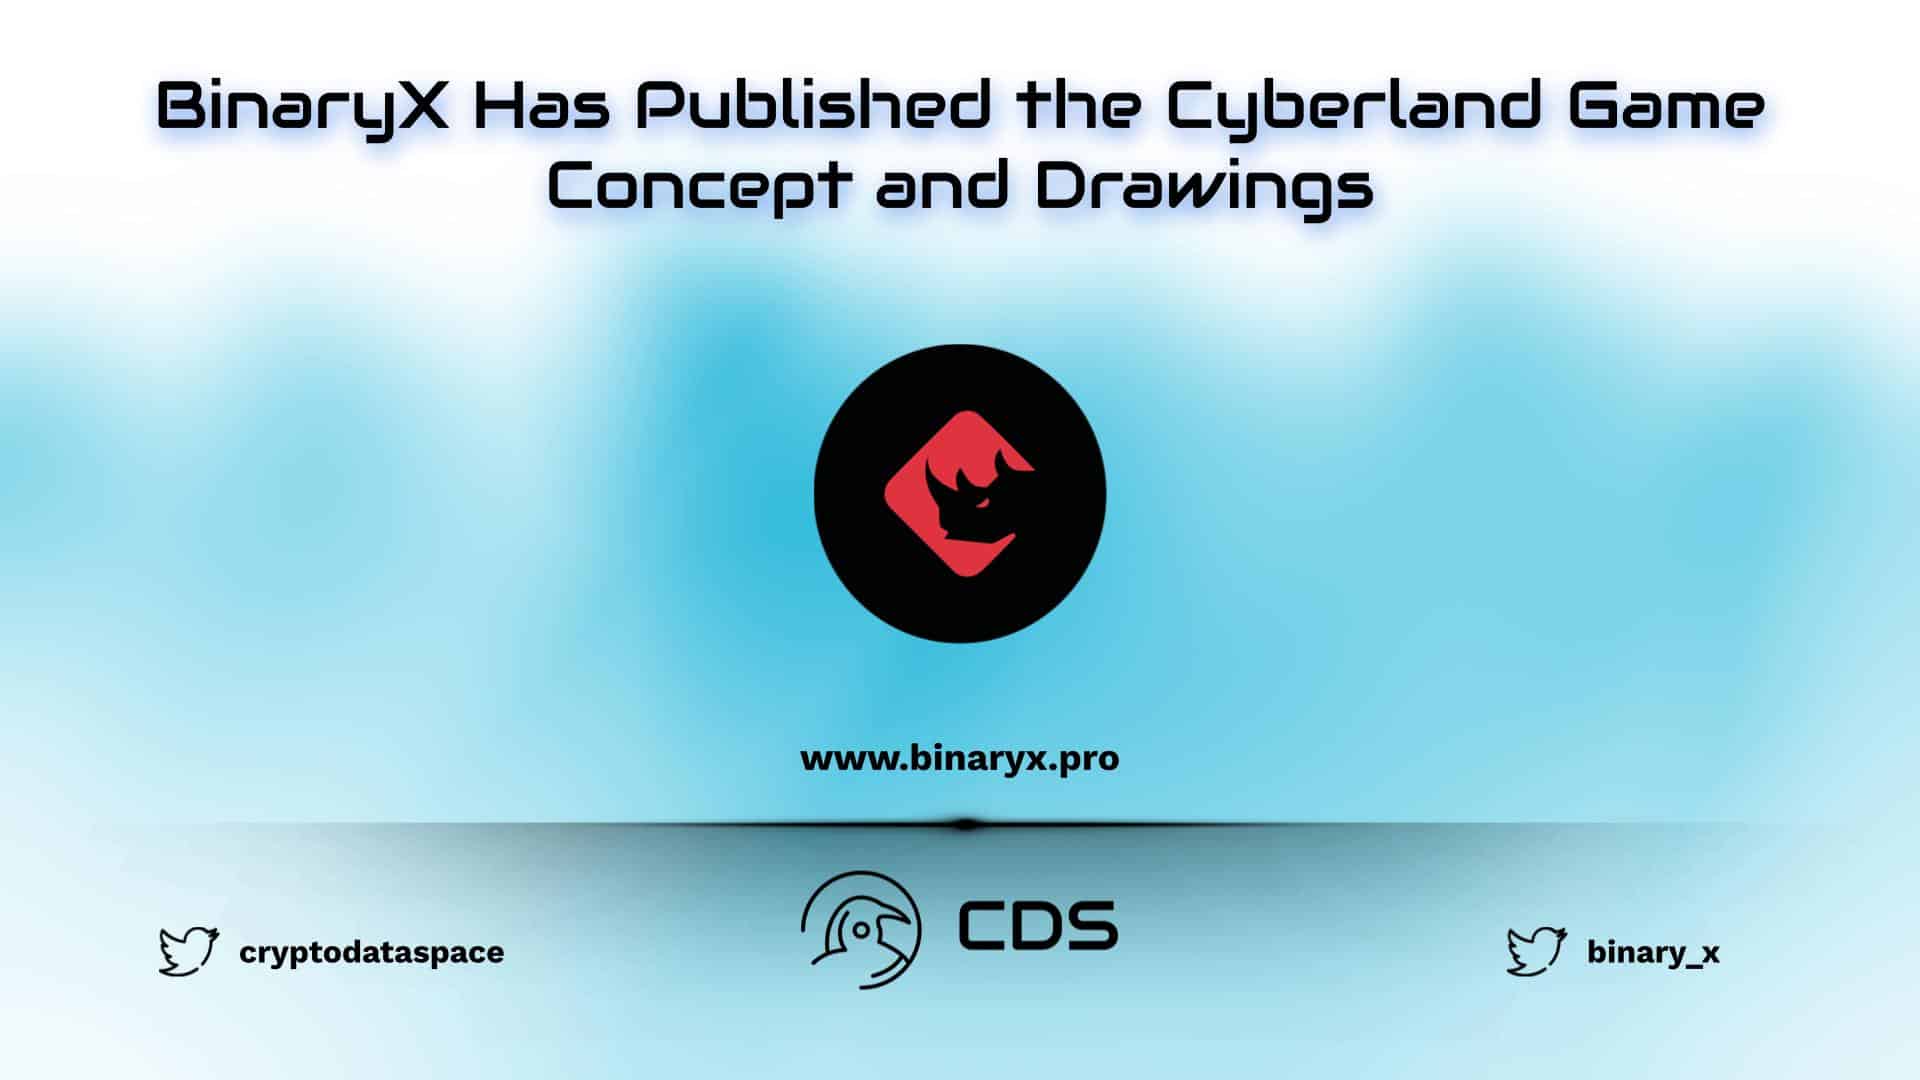 BinaryX Has Published the Cyberland Game Concept and Drawings